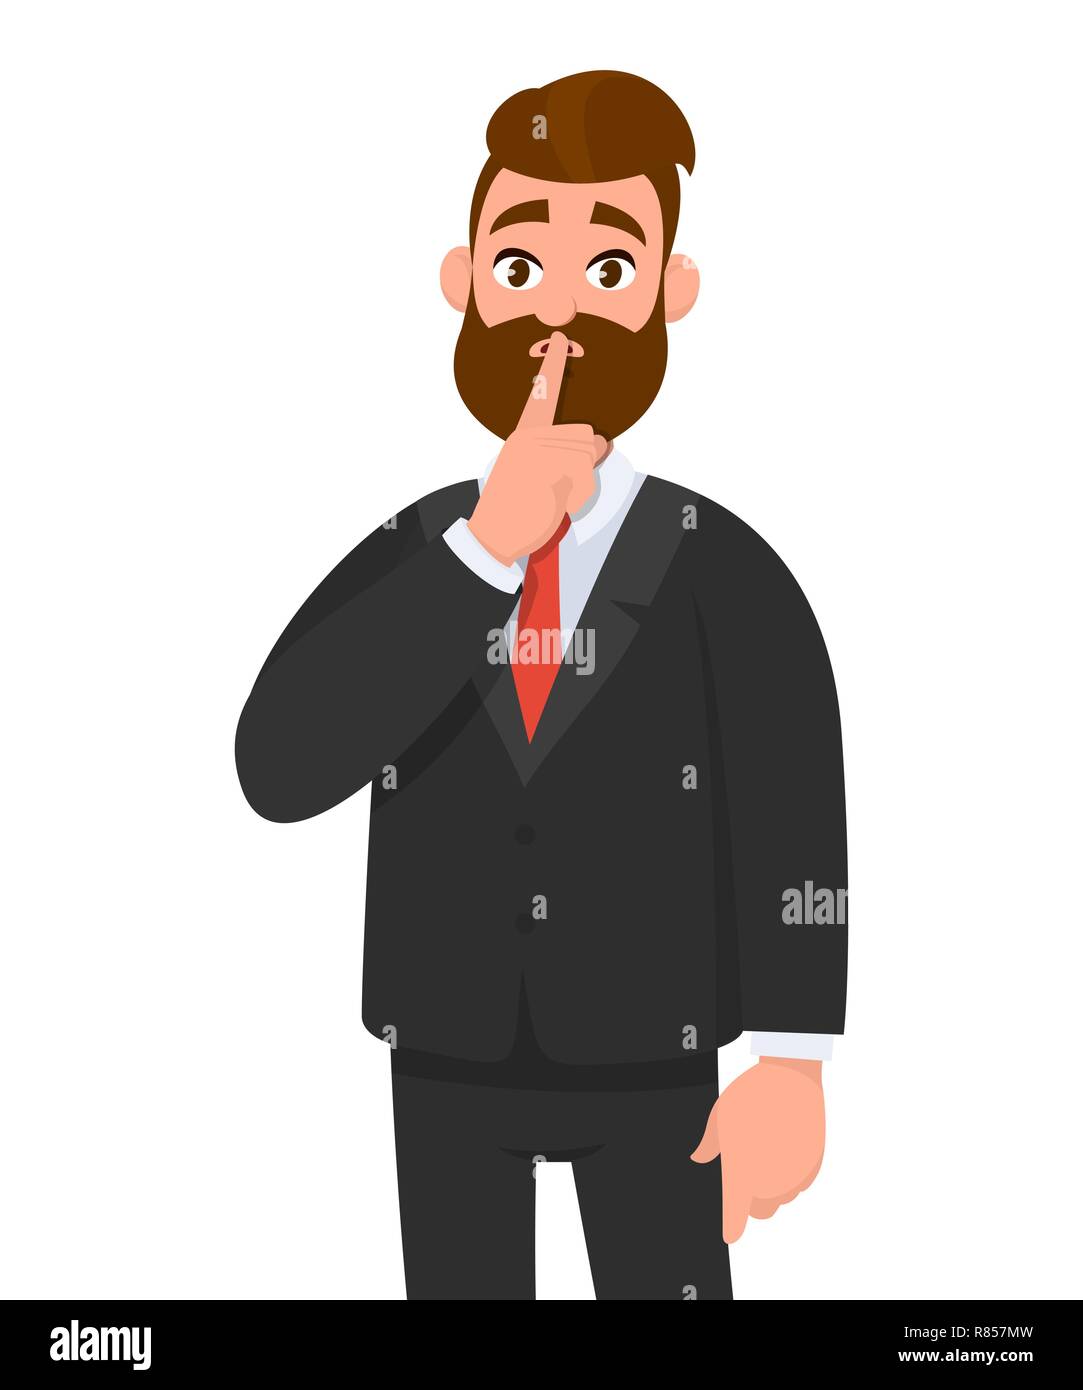 Business man asking silence please. Keep quiet. Man closed  his mouth with finger. Shut up! Emotion and body language concept in cartoon style vector Stock Vector